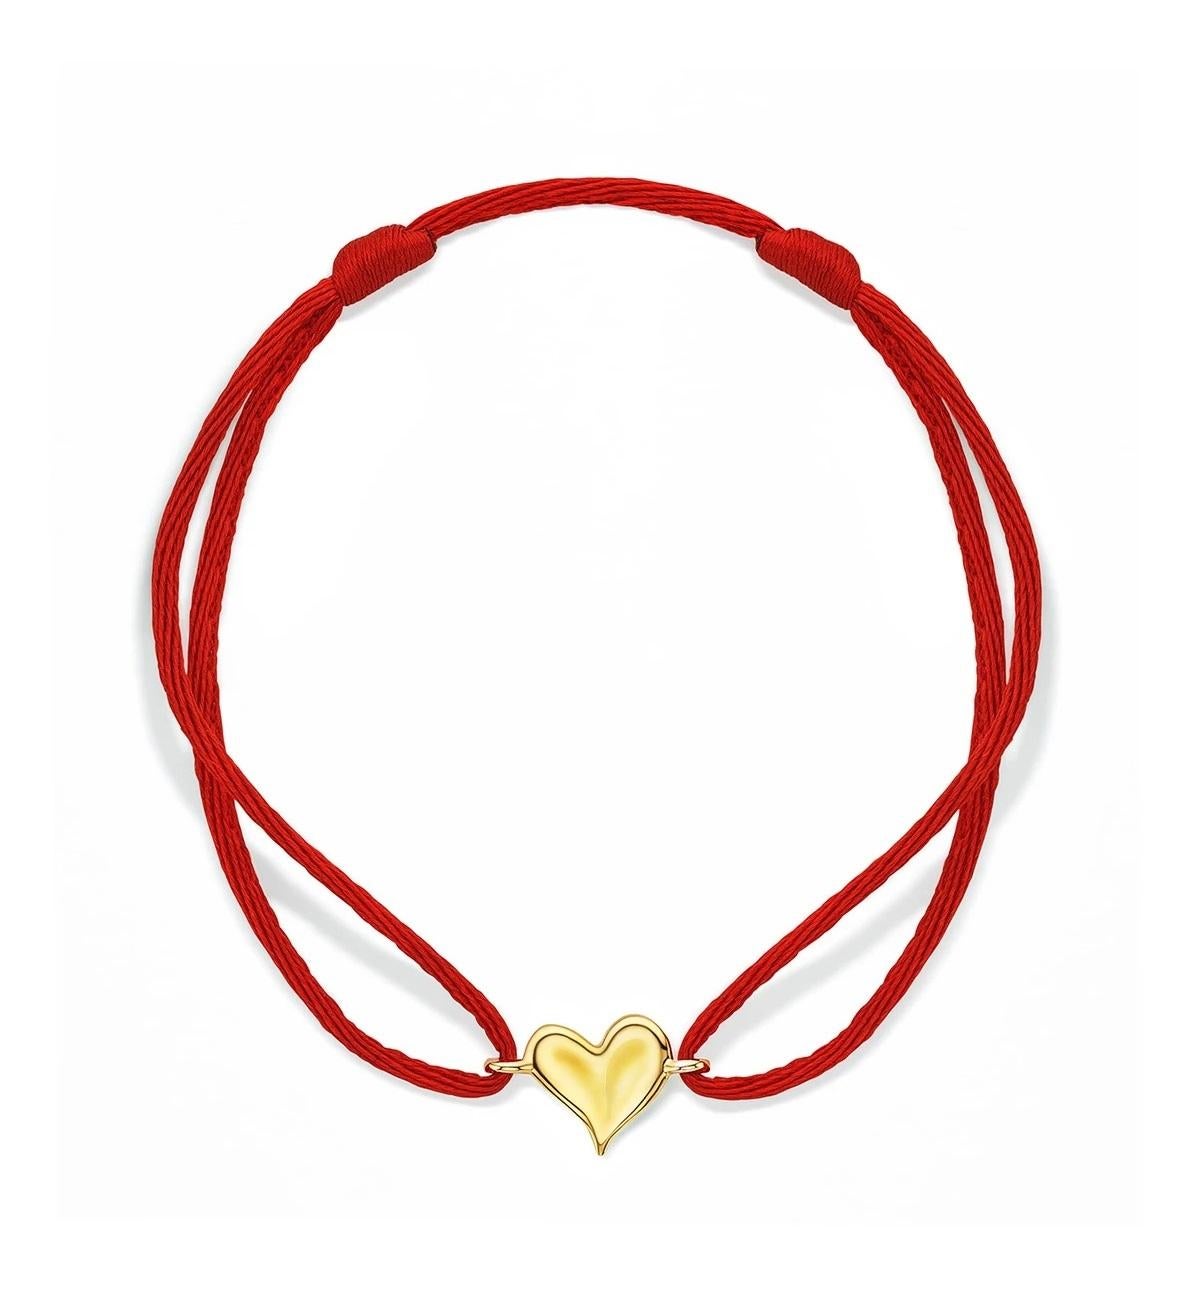 Designed as an expression of love, the Eros Collection evokes the true beauty of the one who wears it.

18K Gold
Red Cord
Diameter: 3